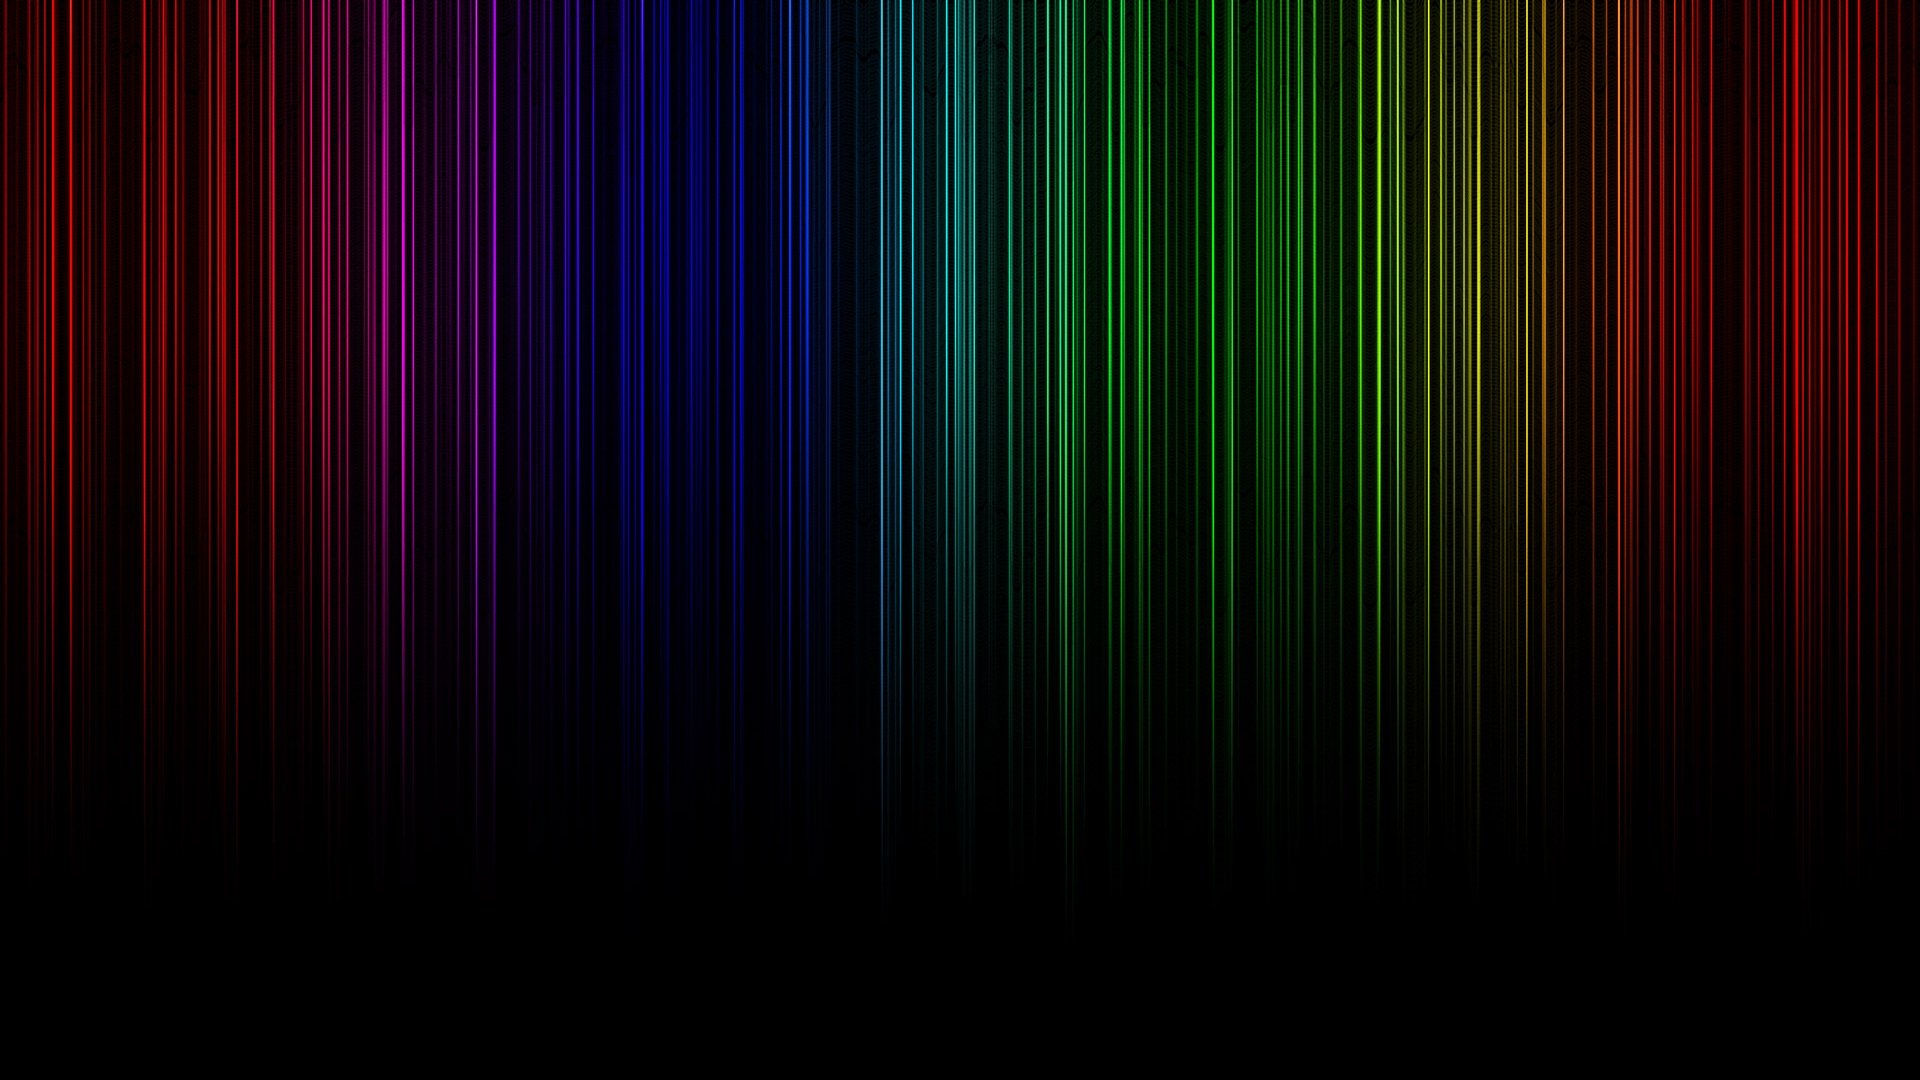 Colorwash Full HD Wallpaper and Background Image | 1920x1080 | ID:210198